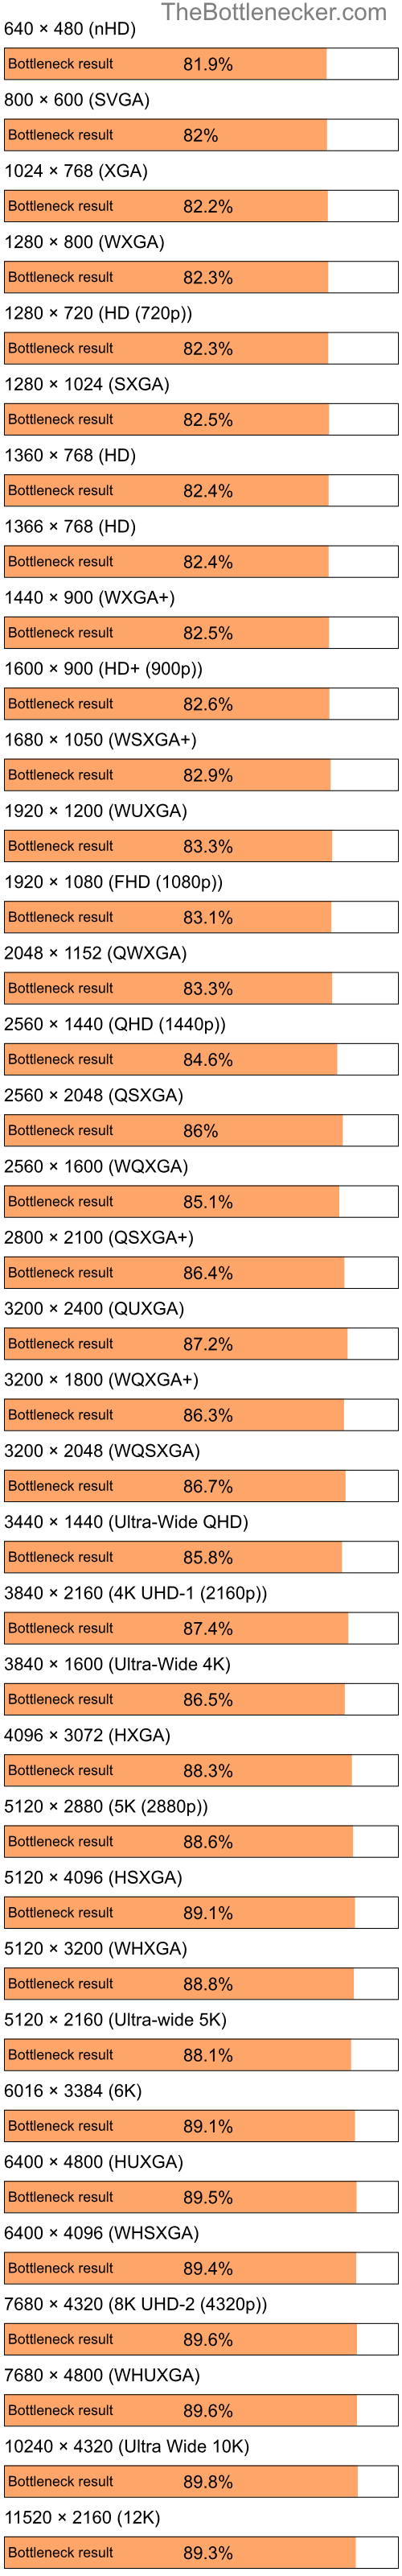 Bottleneck results by resolution for Intel Celeron and AMD Radeon X1270 in Graphic Card Intense Tasks